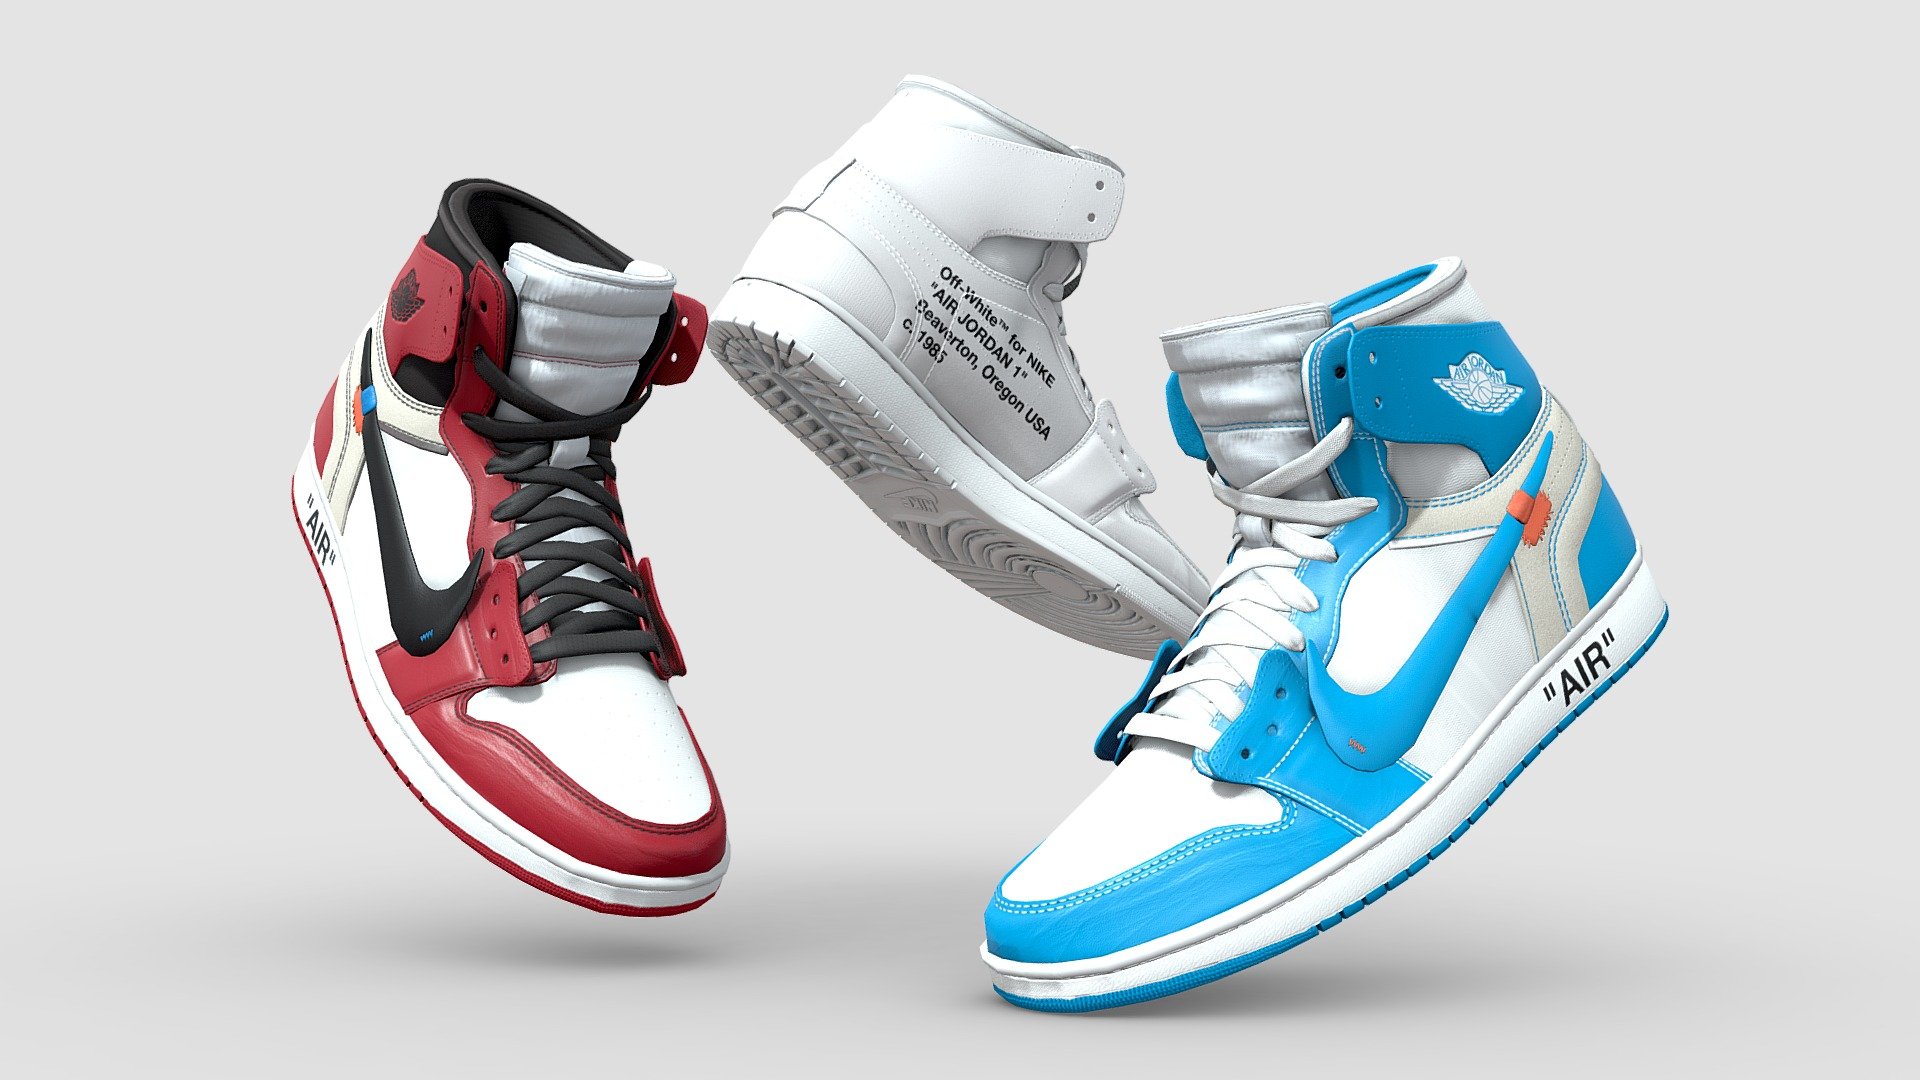 One of the most hyped sneakers of 2018. The Air Jordan 1 x Off White features a half finished, in construction type of look, with exposed foam and hastily stitched on swoosh. All three colourways that dropped are featured in this pack

Modelled in Blender and textured in Substance, no detail went overlooked in the creation of this shoe. As a result it is subdivision ready. Unwrapped with quality at the forefront, the four texture sets allow the materials to take centre stage. 

What's included
The &ldquo;OneMesh